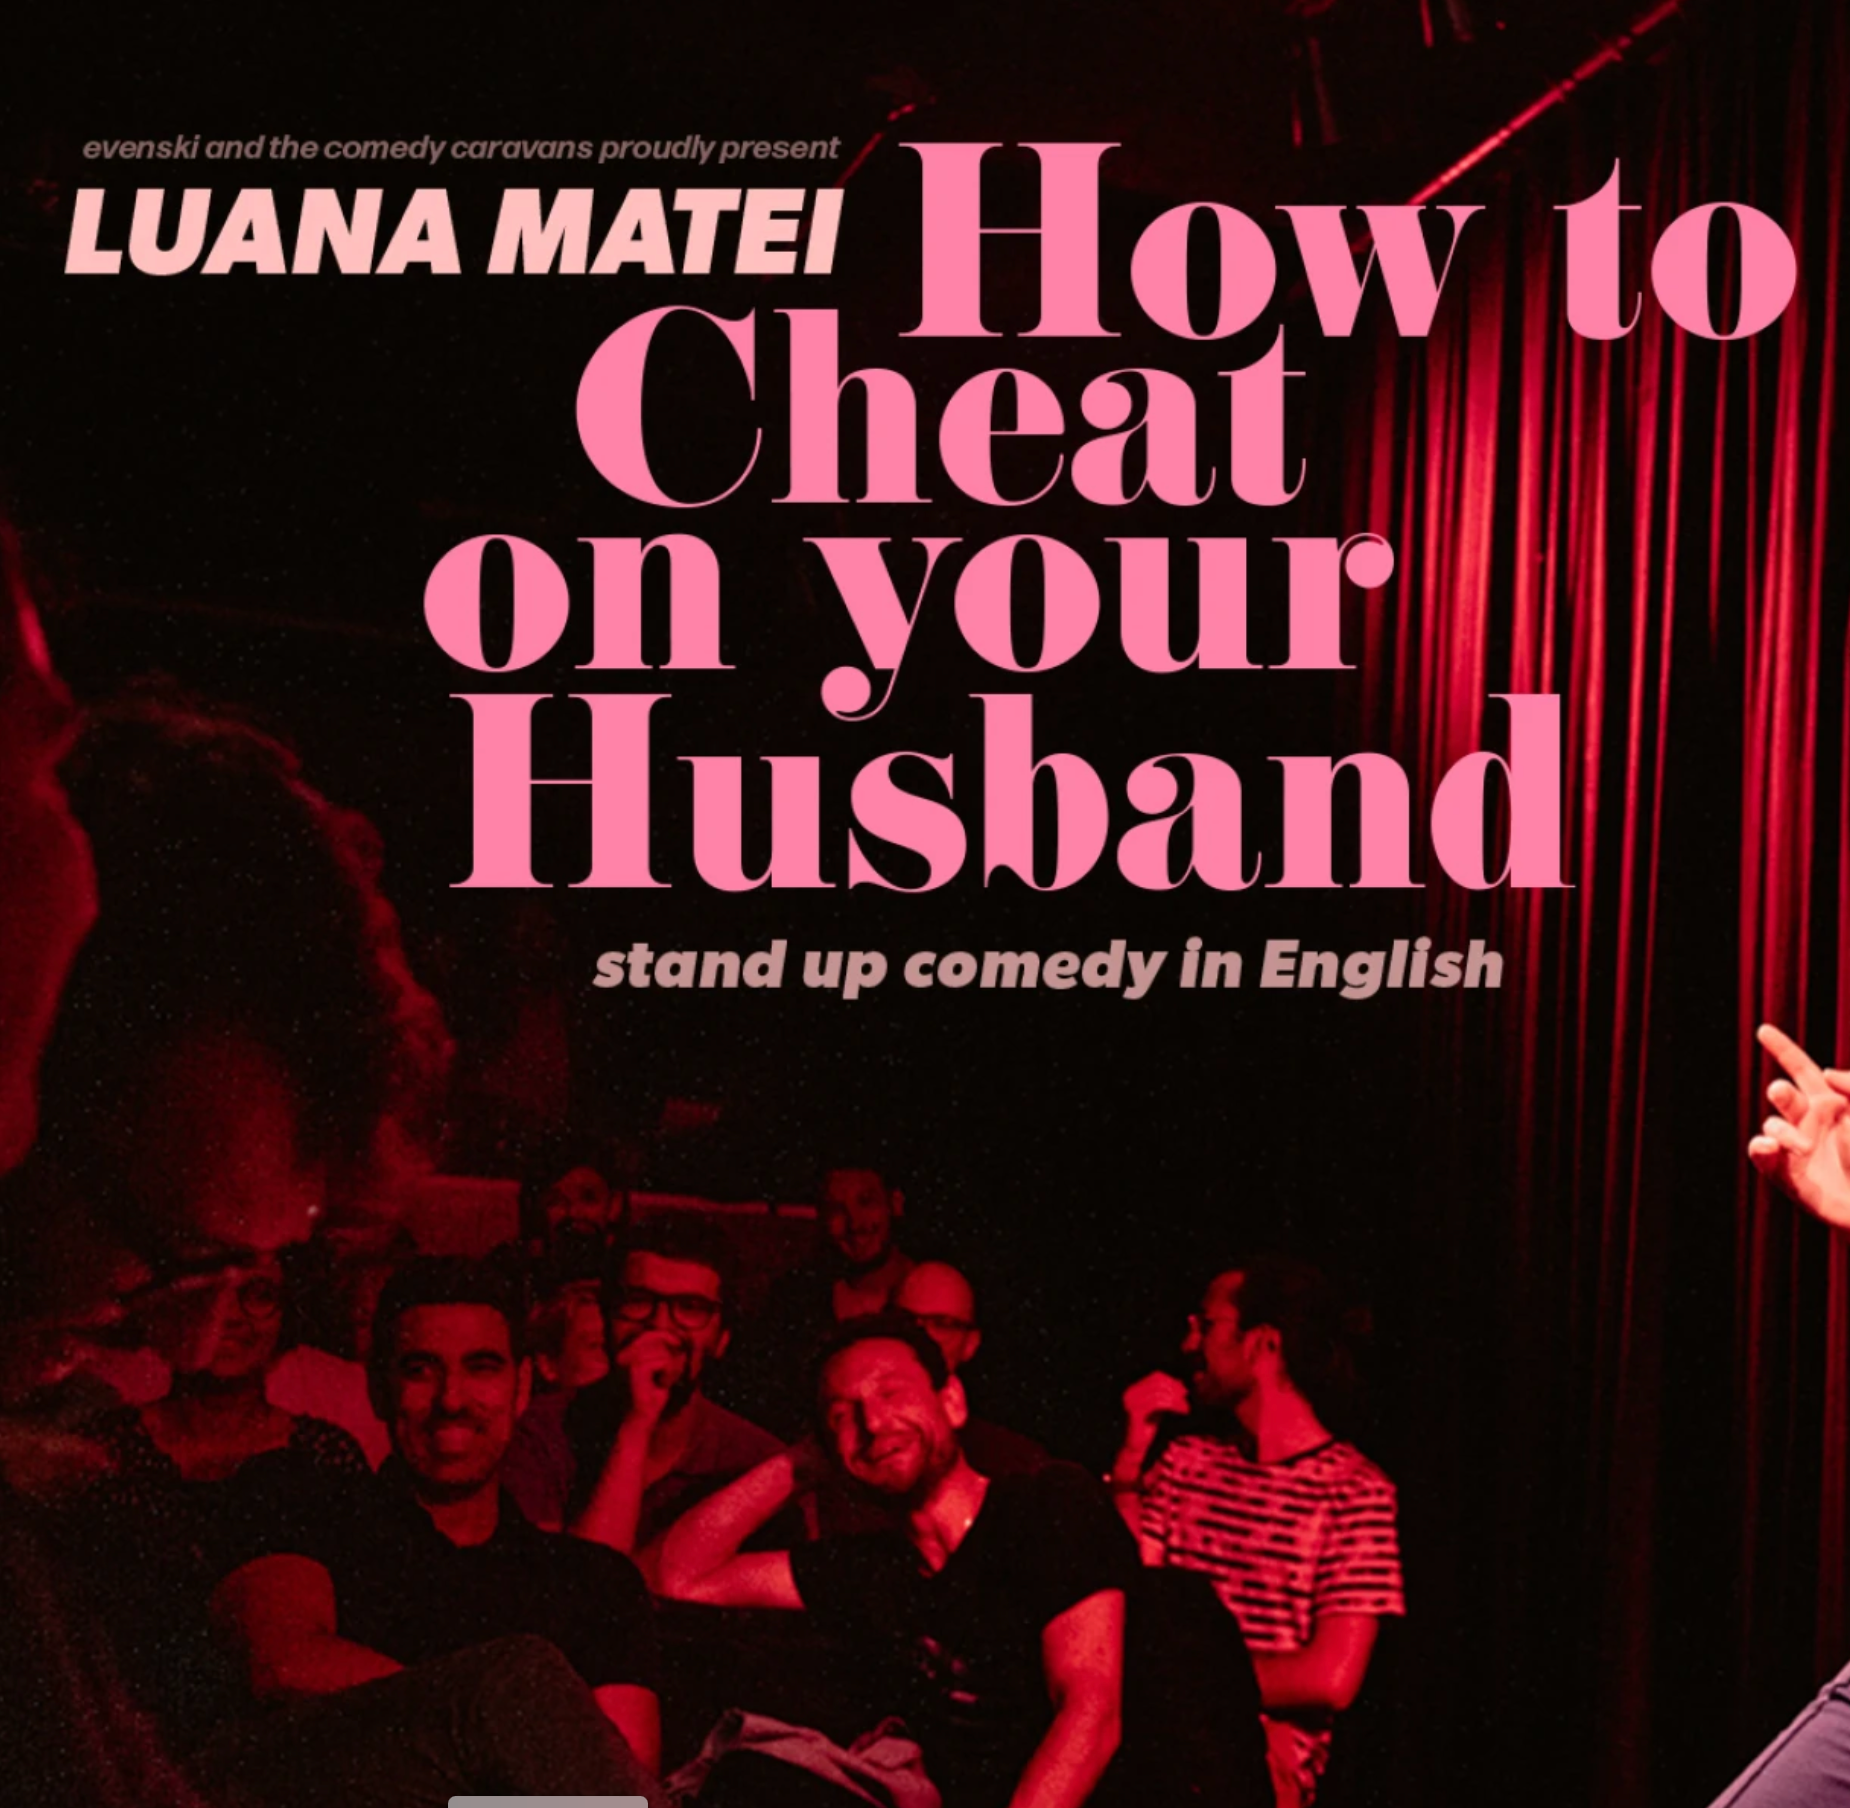 Luana Matei - How To Cheat On Your husband - stand up